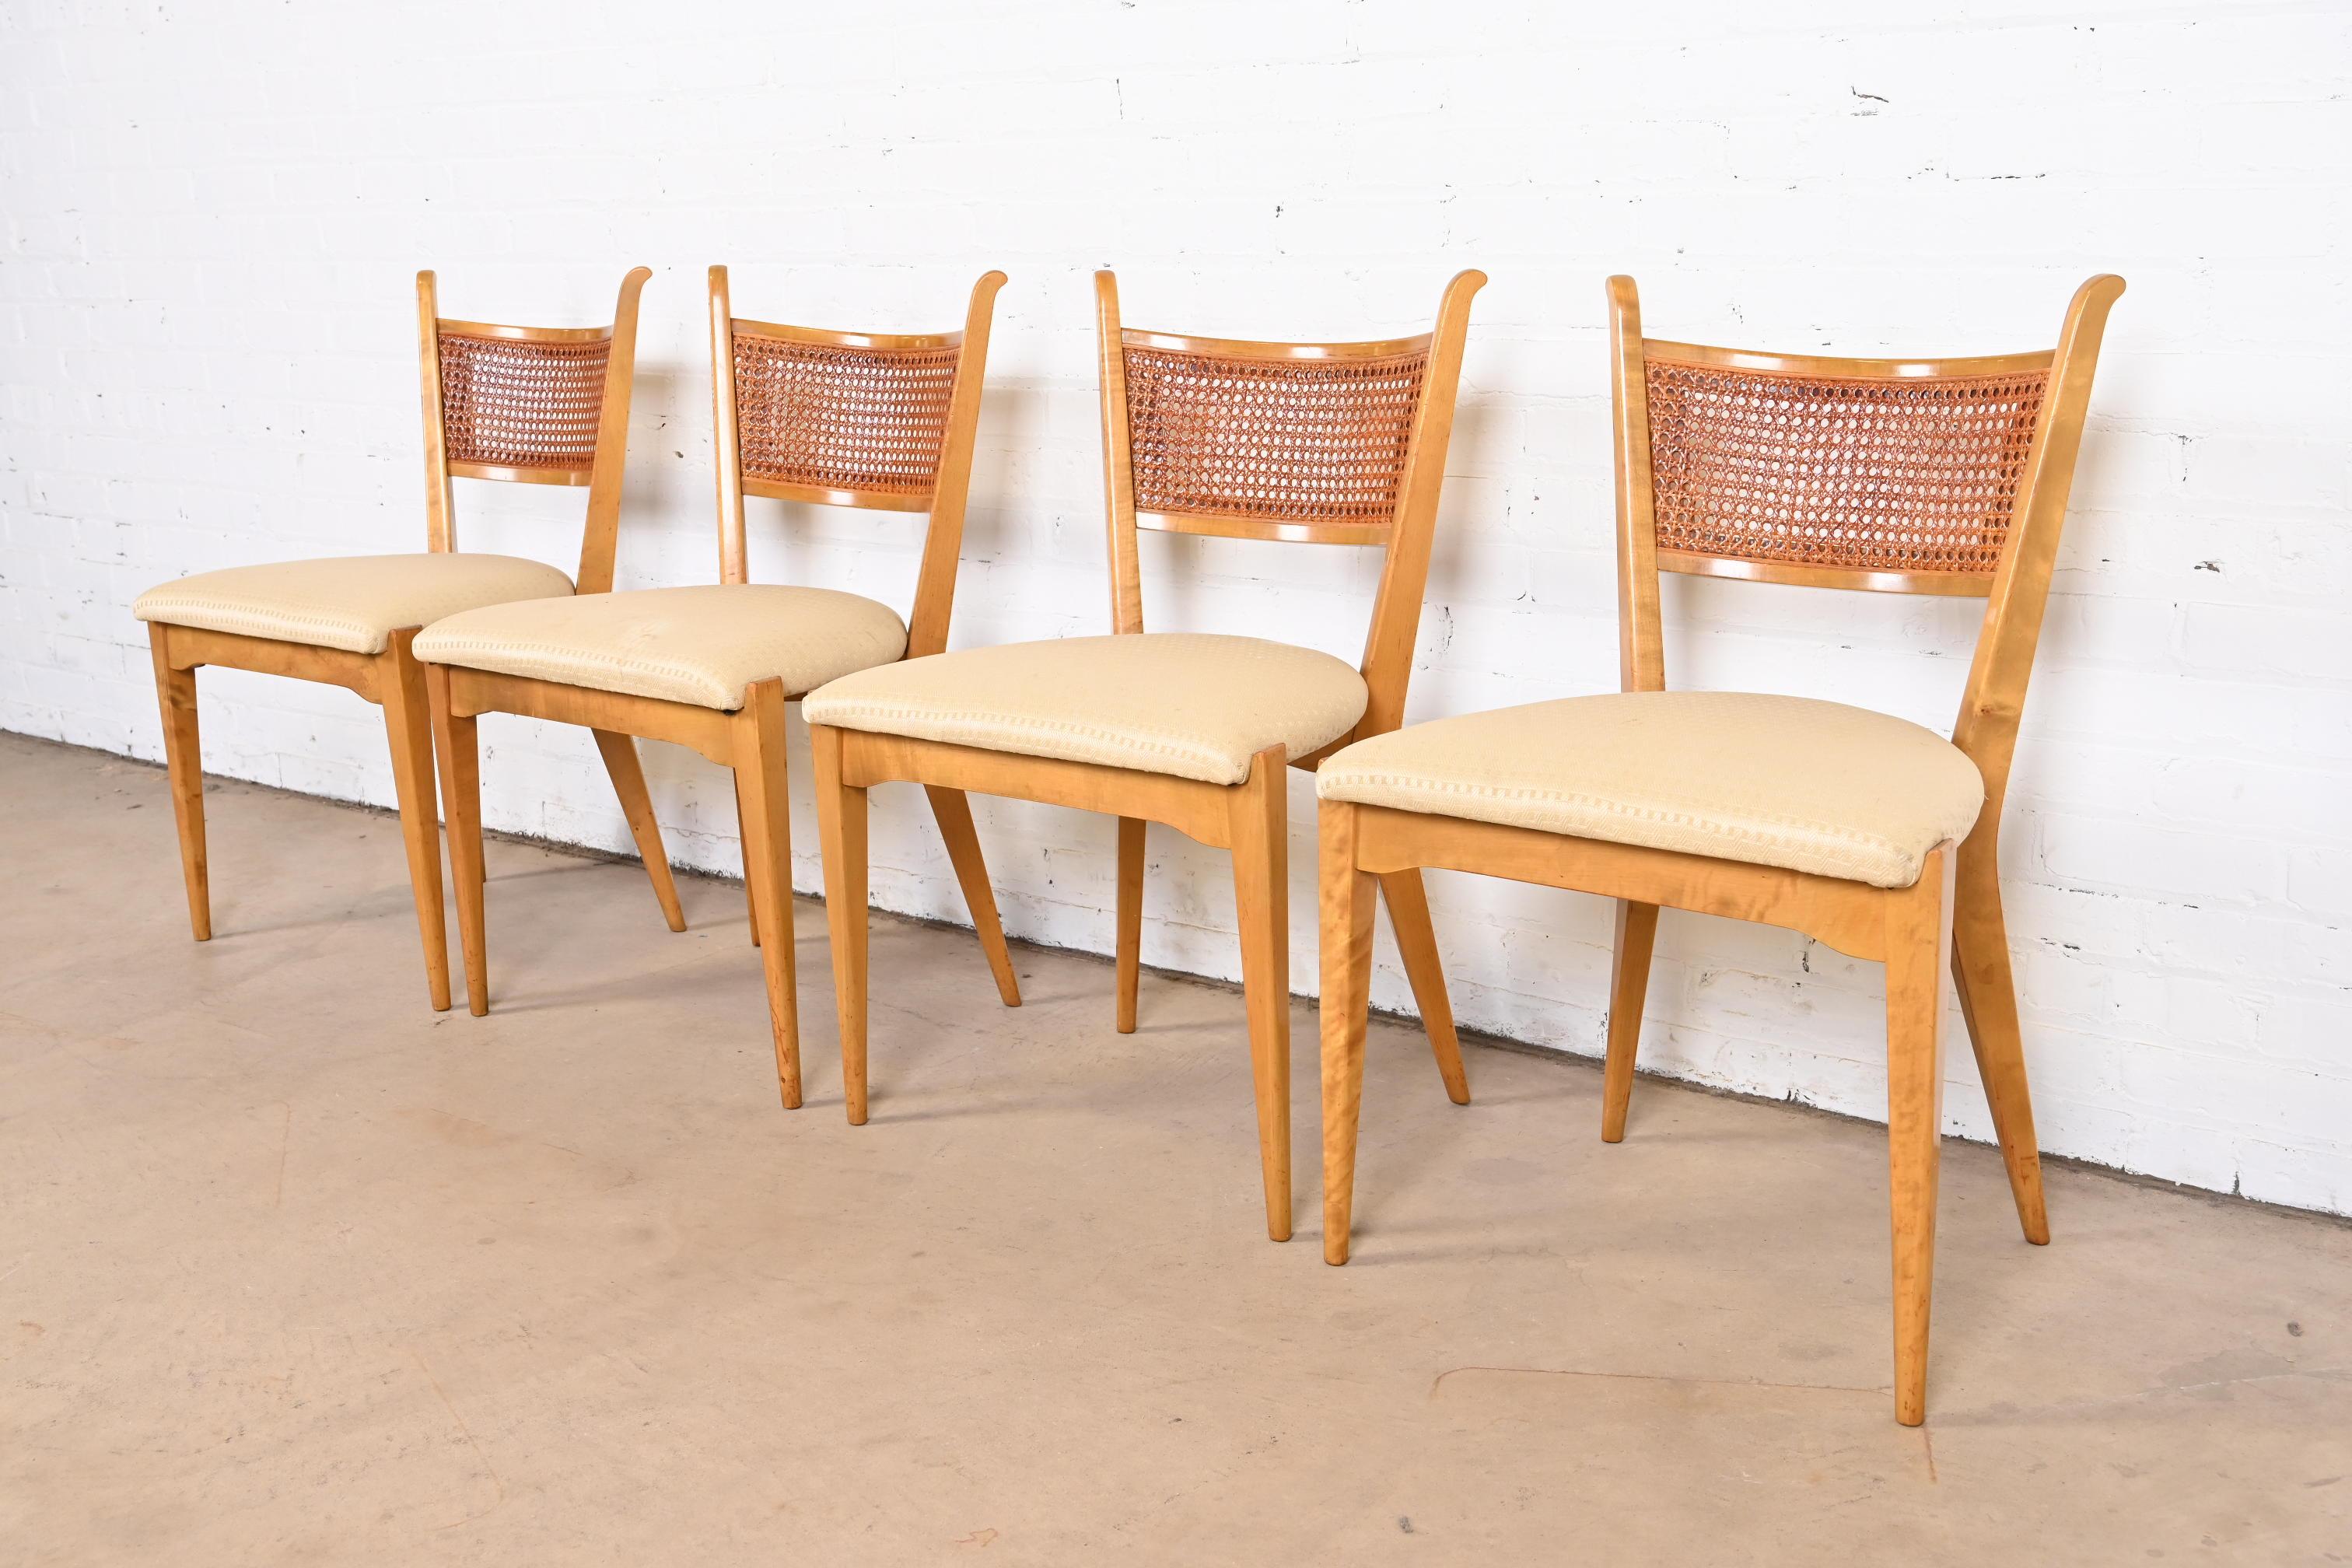 Mid-20th Century Edmond Spence Swedish Modern Sculpted Maple and Cane Dining Chairs, Set of Four For Sale